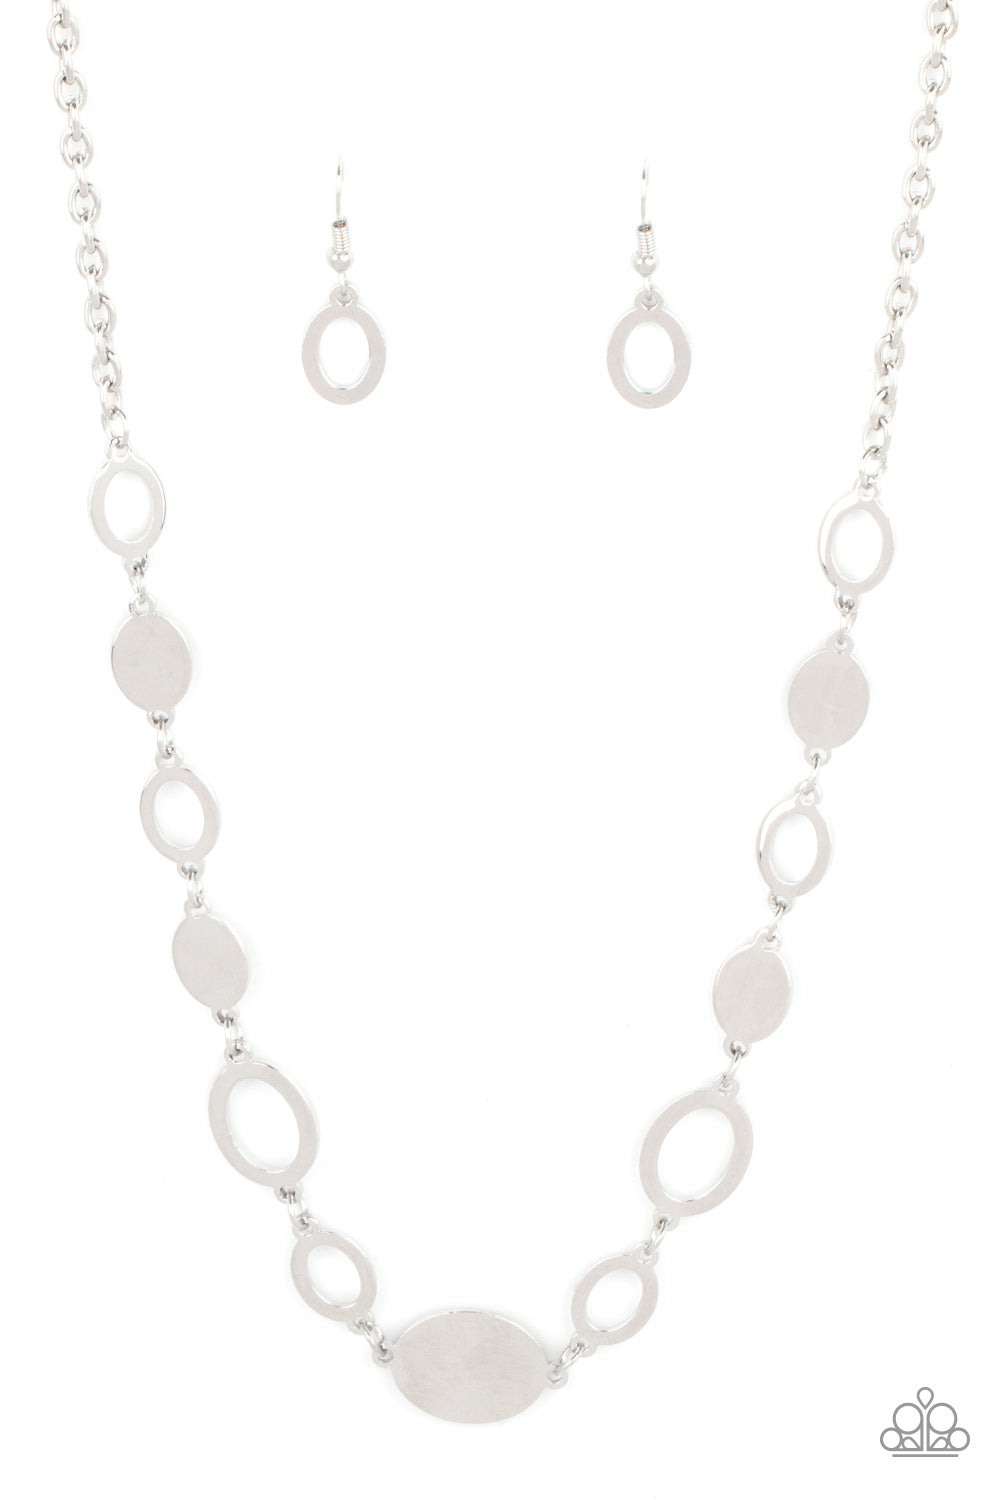 Working OVAL-time - Silver Paparazzi Necklace